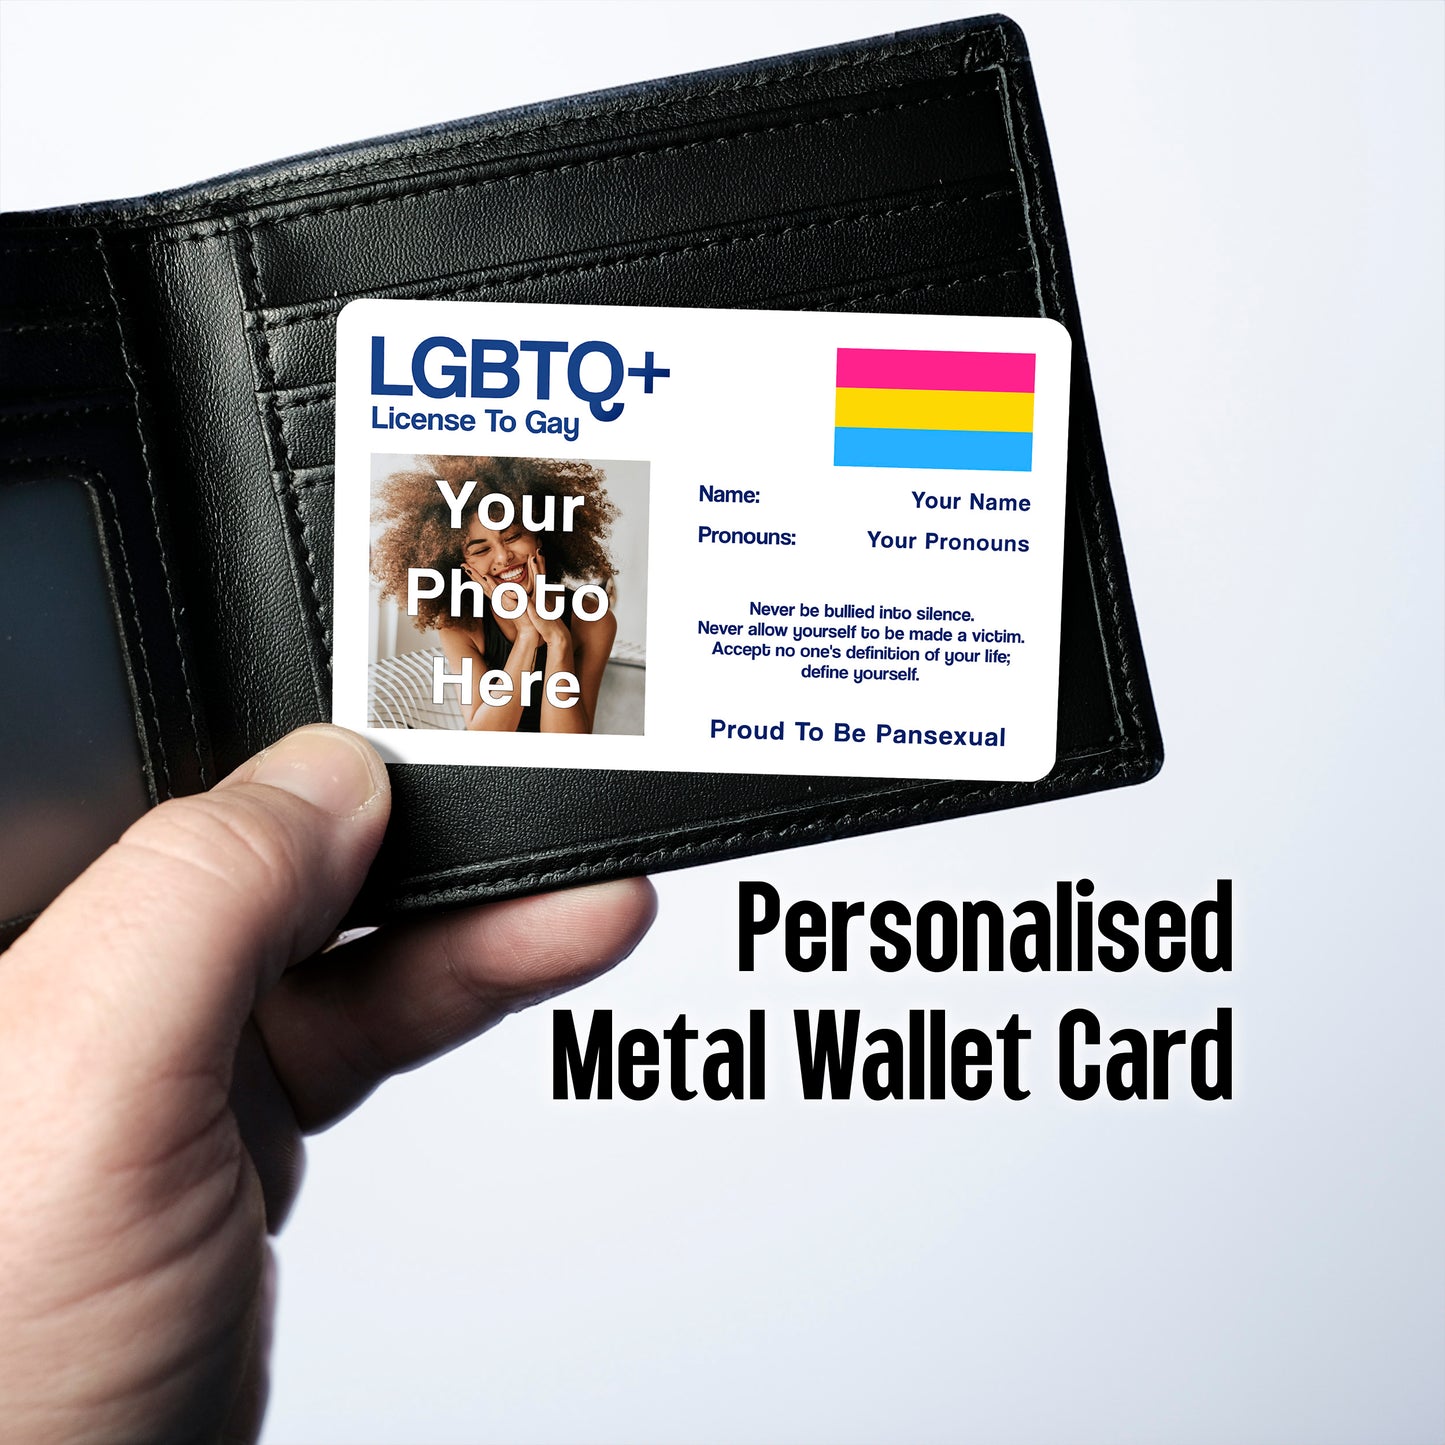 Pansexual License To Gay aluminium novelty wallet card personalised with your name, pronouns, and photo